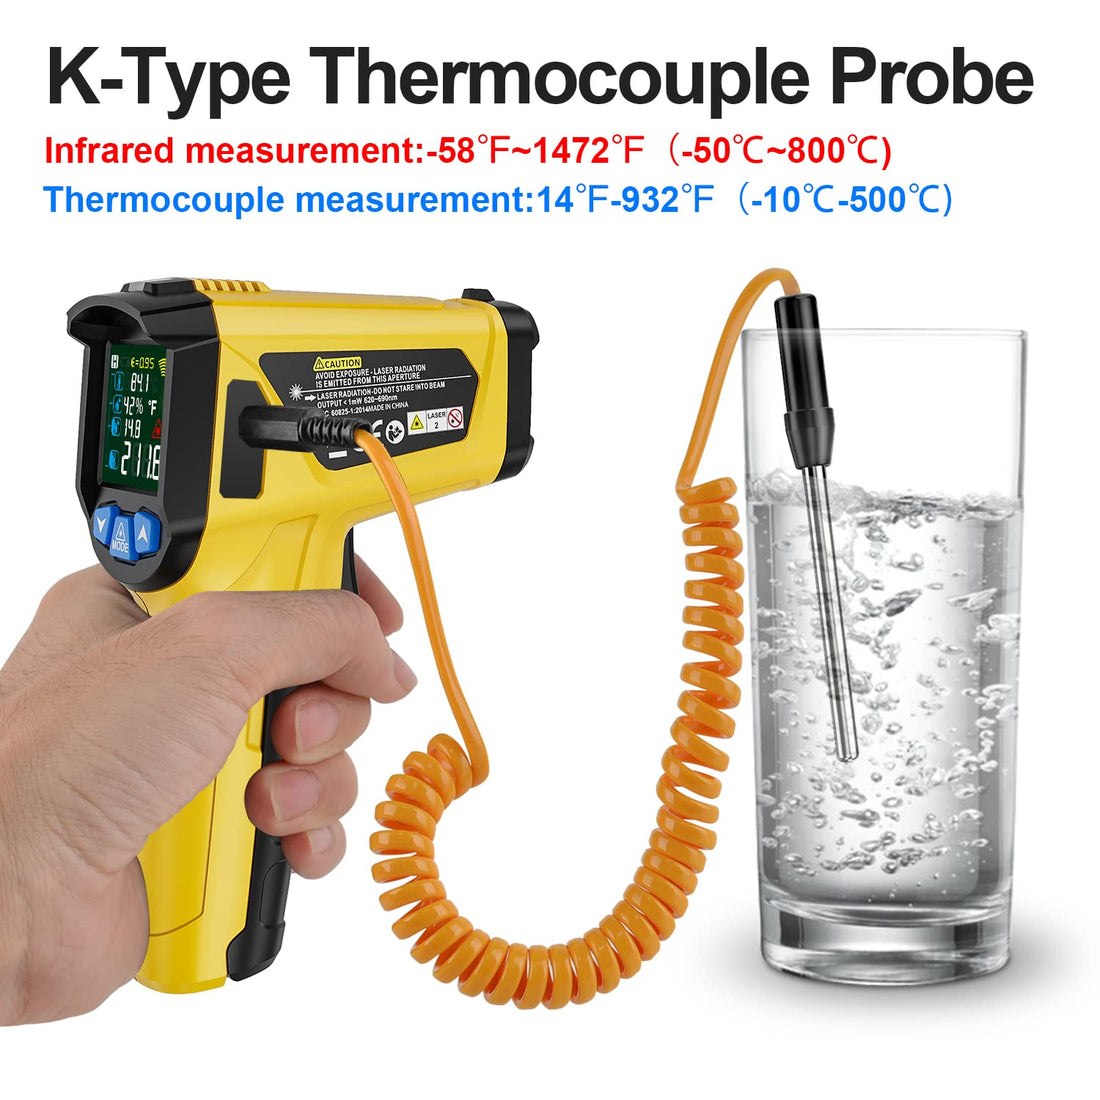 Infrared Thermometer Temperature Gun -58°F~1472°F, MESTEK Digital Laser Thermometer Gun with K Type Thermocouple Probe for Cooking, Pizza Oven, IR Thermometer Temp Gun with Adjustable Emissivity